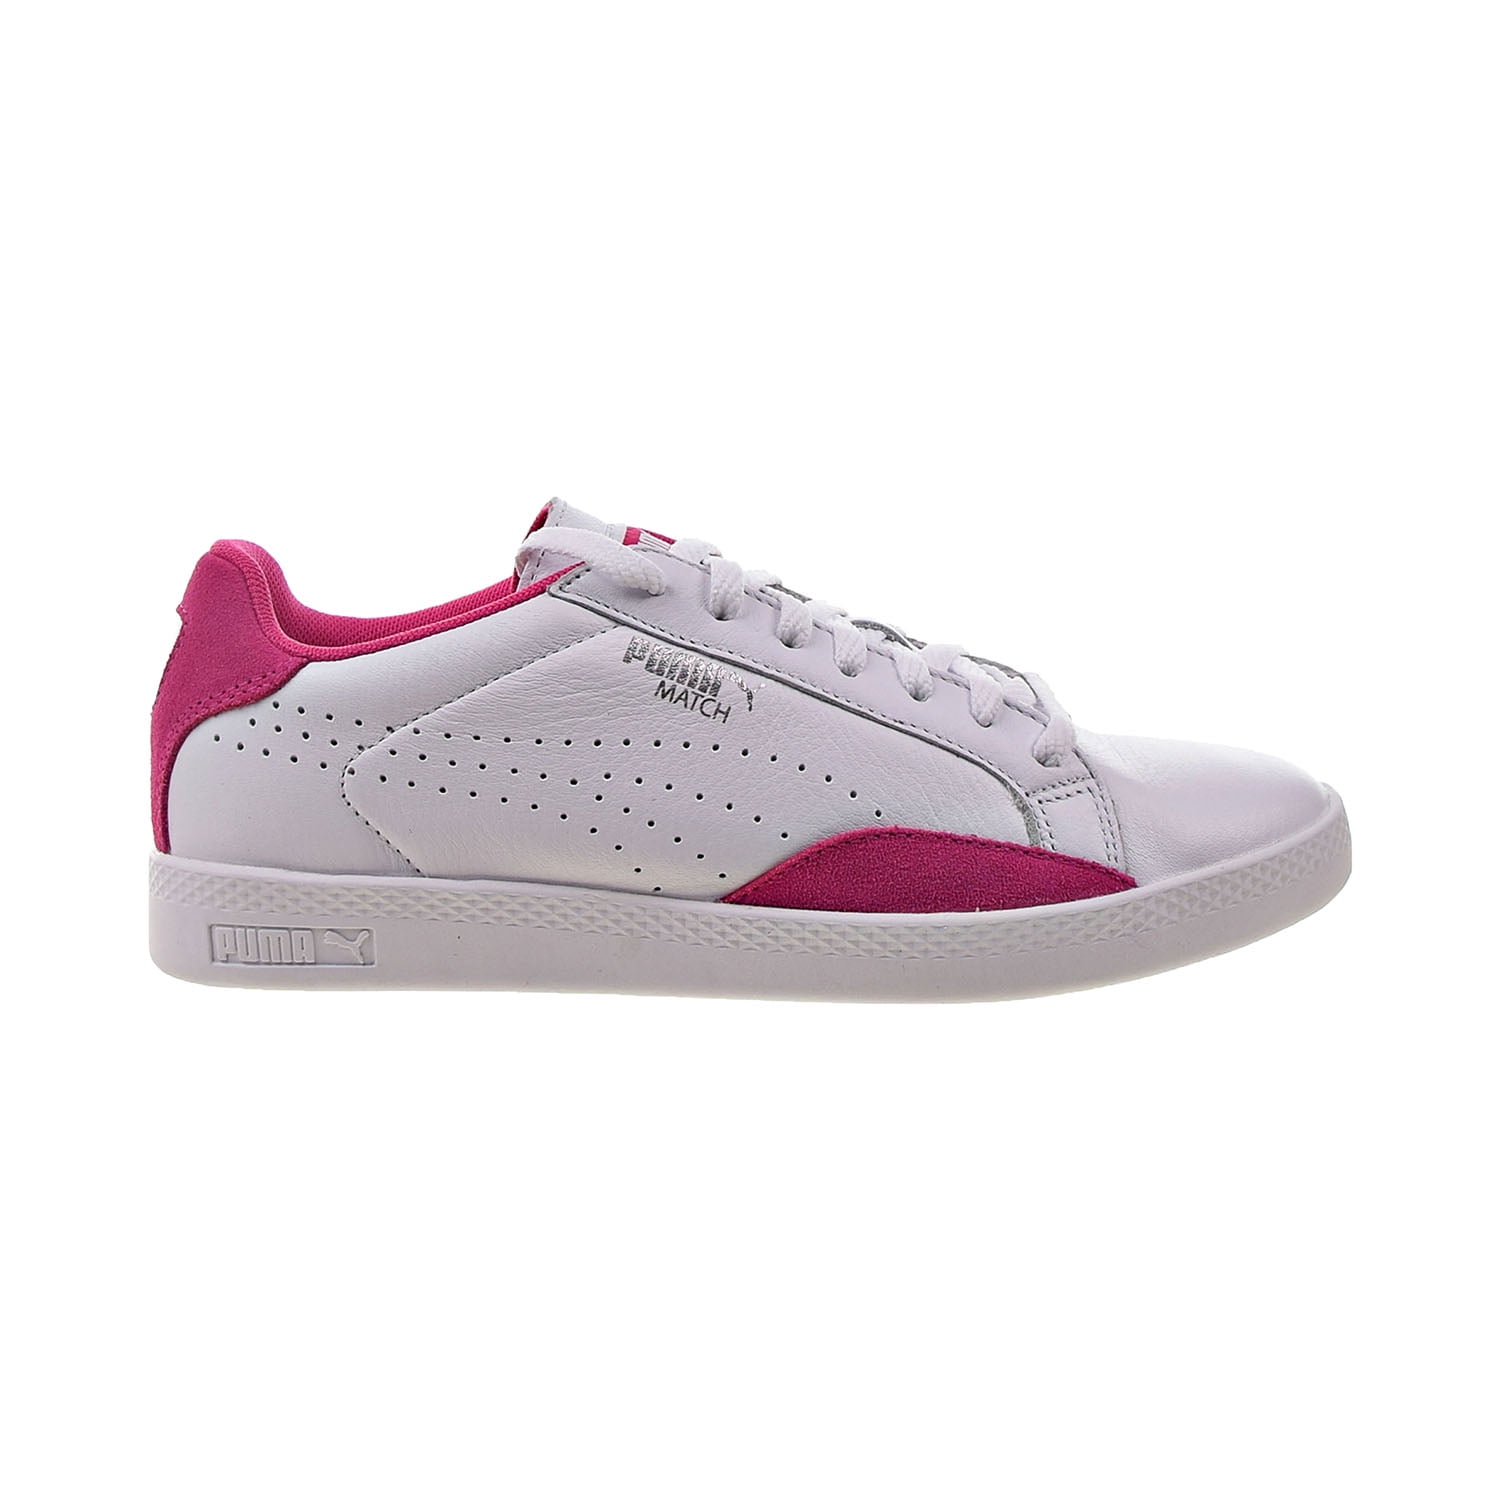 puma match low sneakers